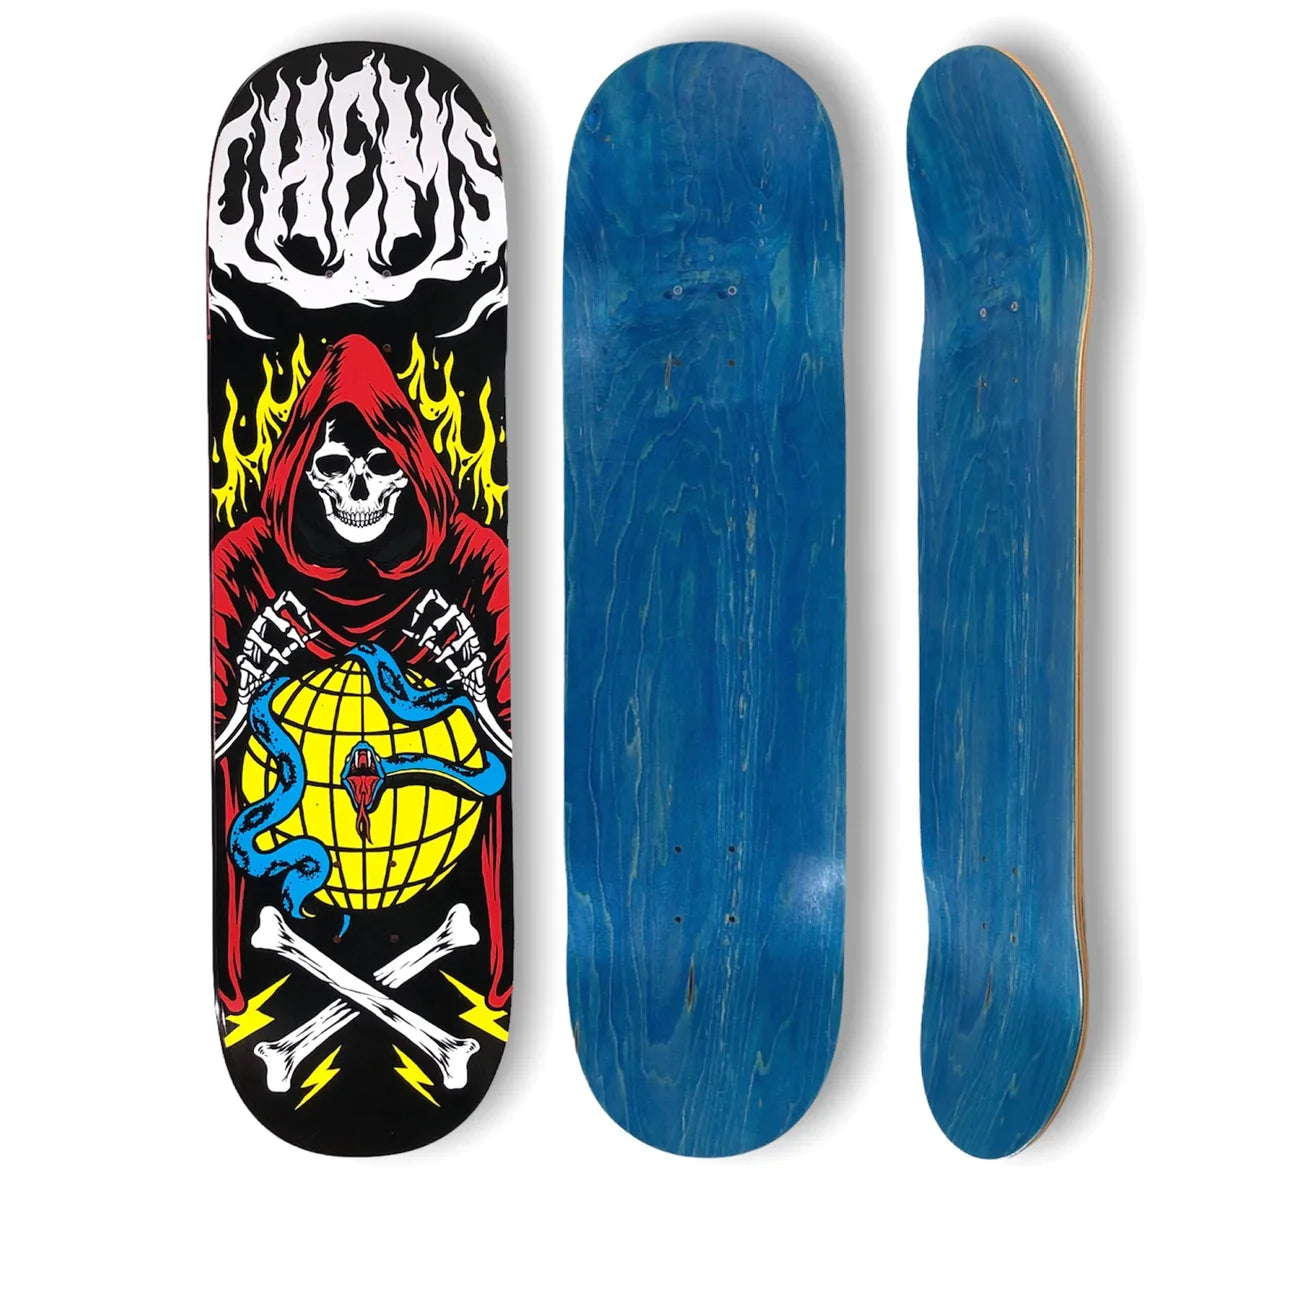 Chems Global Grim Skateboard Deck; Black background with a red grim reaper graphic; White Chems logo at the top and crossbones on the bottom; Bold and eye-catching design for a visually striking skateboard deck; Displays alternate angle from the top and side;